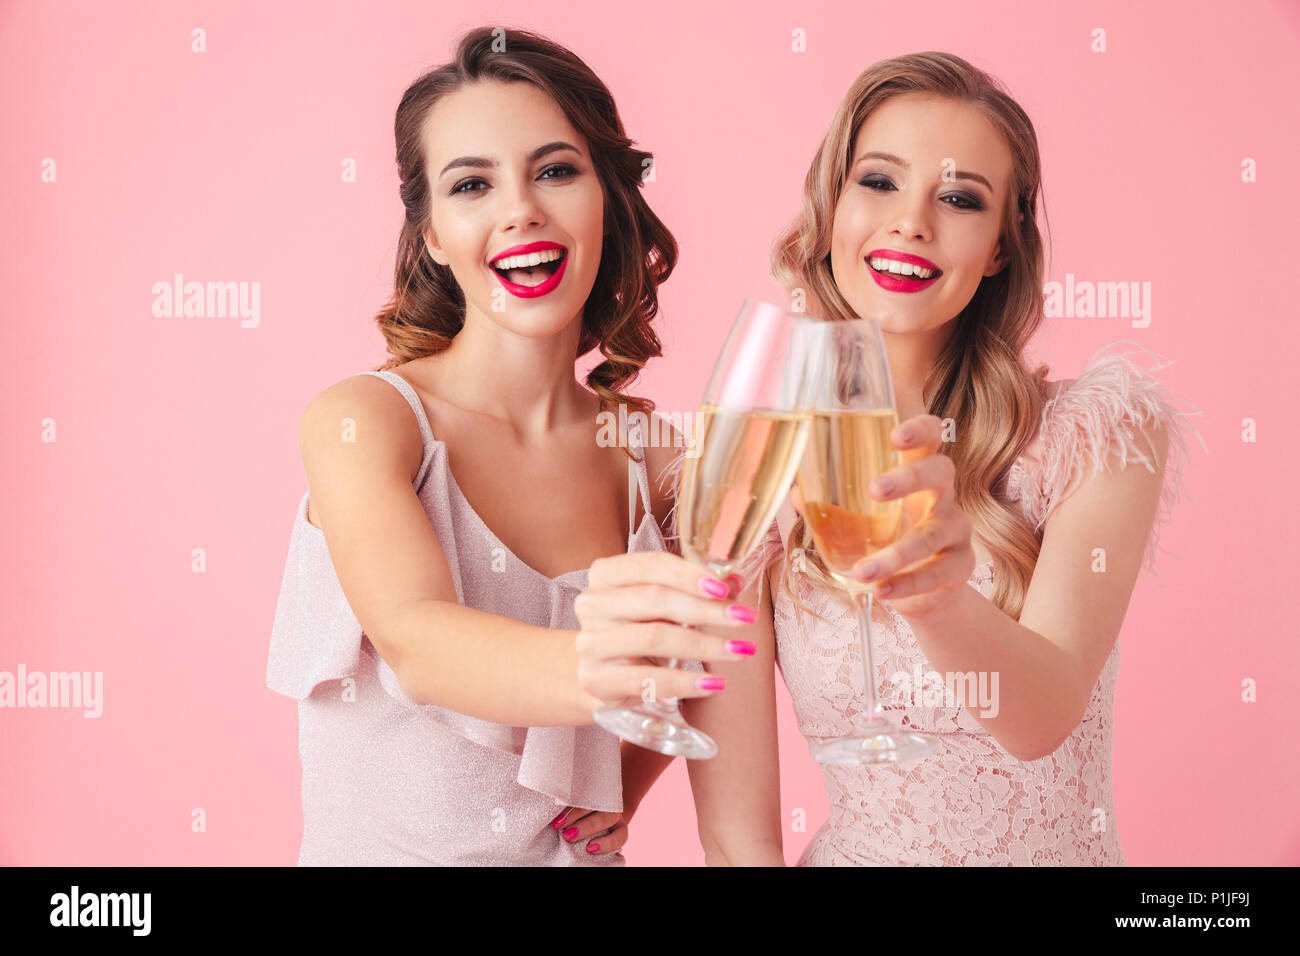 Two cheerful women in dresses drinking champagne and looking at the camera over pink background Stock Photo